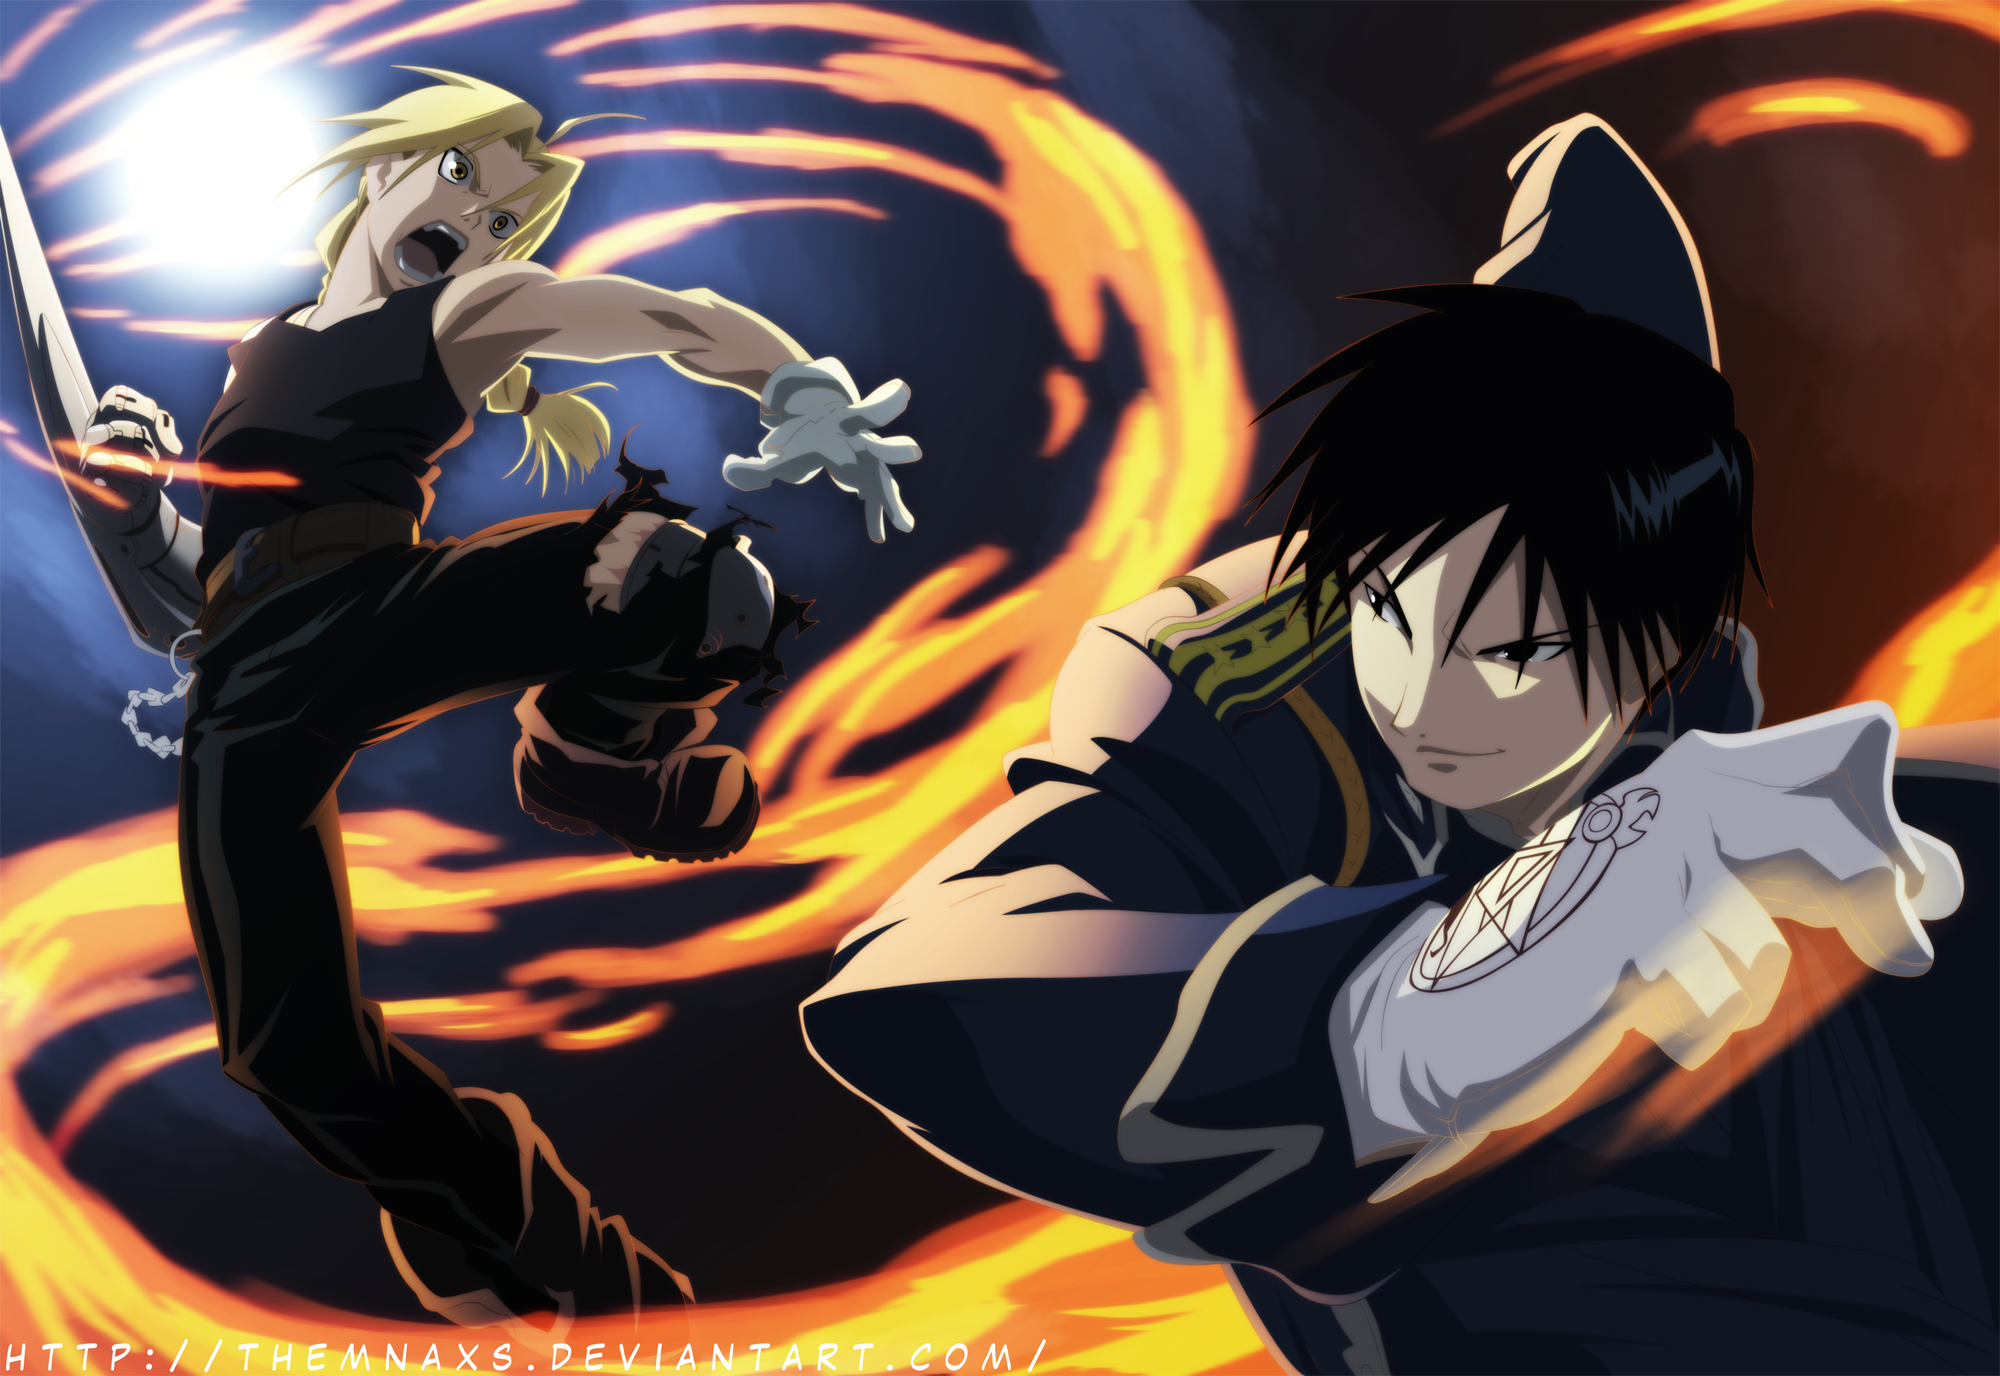 Edward Elric Roy Mustang Wallpaper - Resolution:2000x1376 - ID:1054510 -  